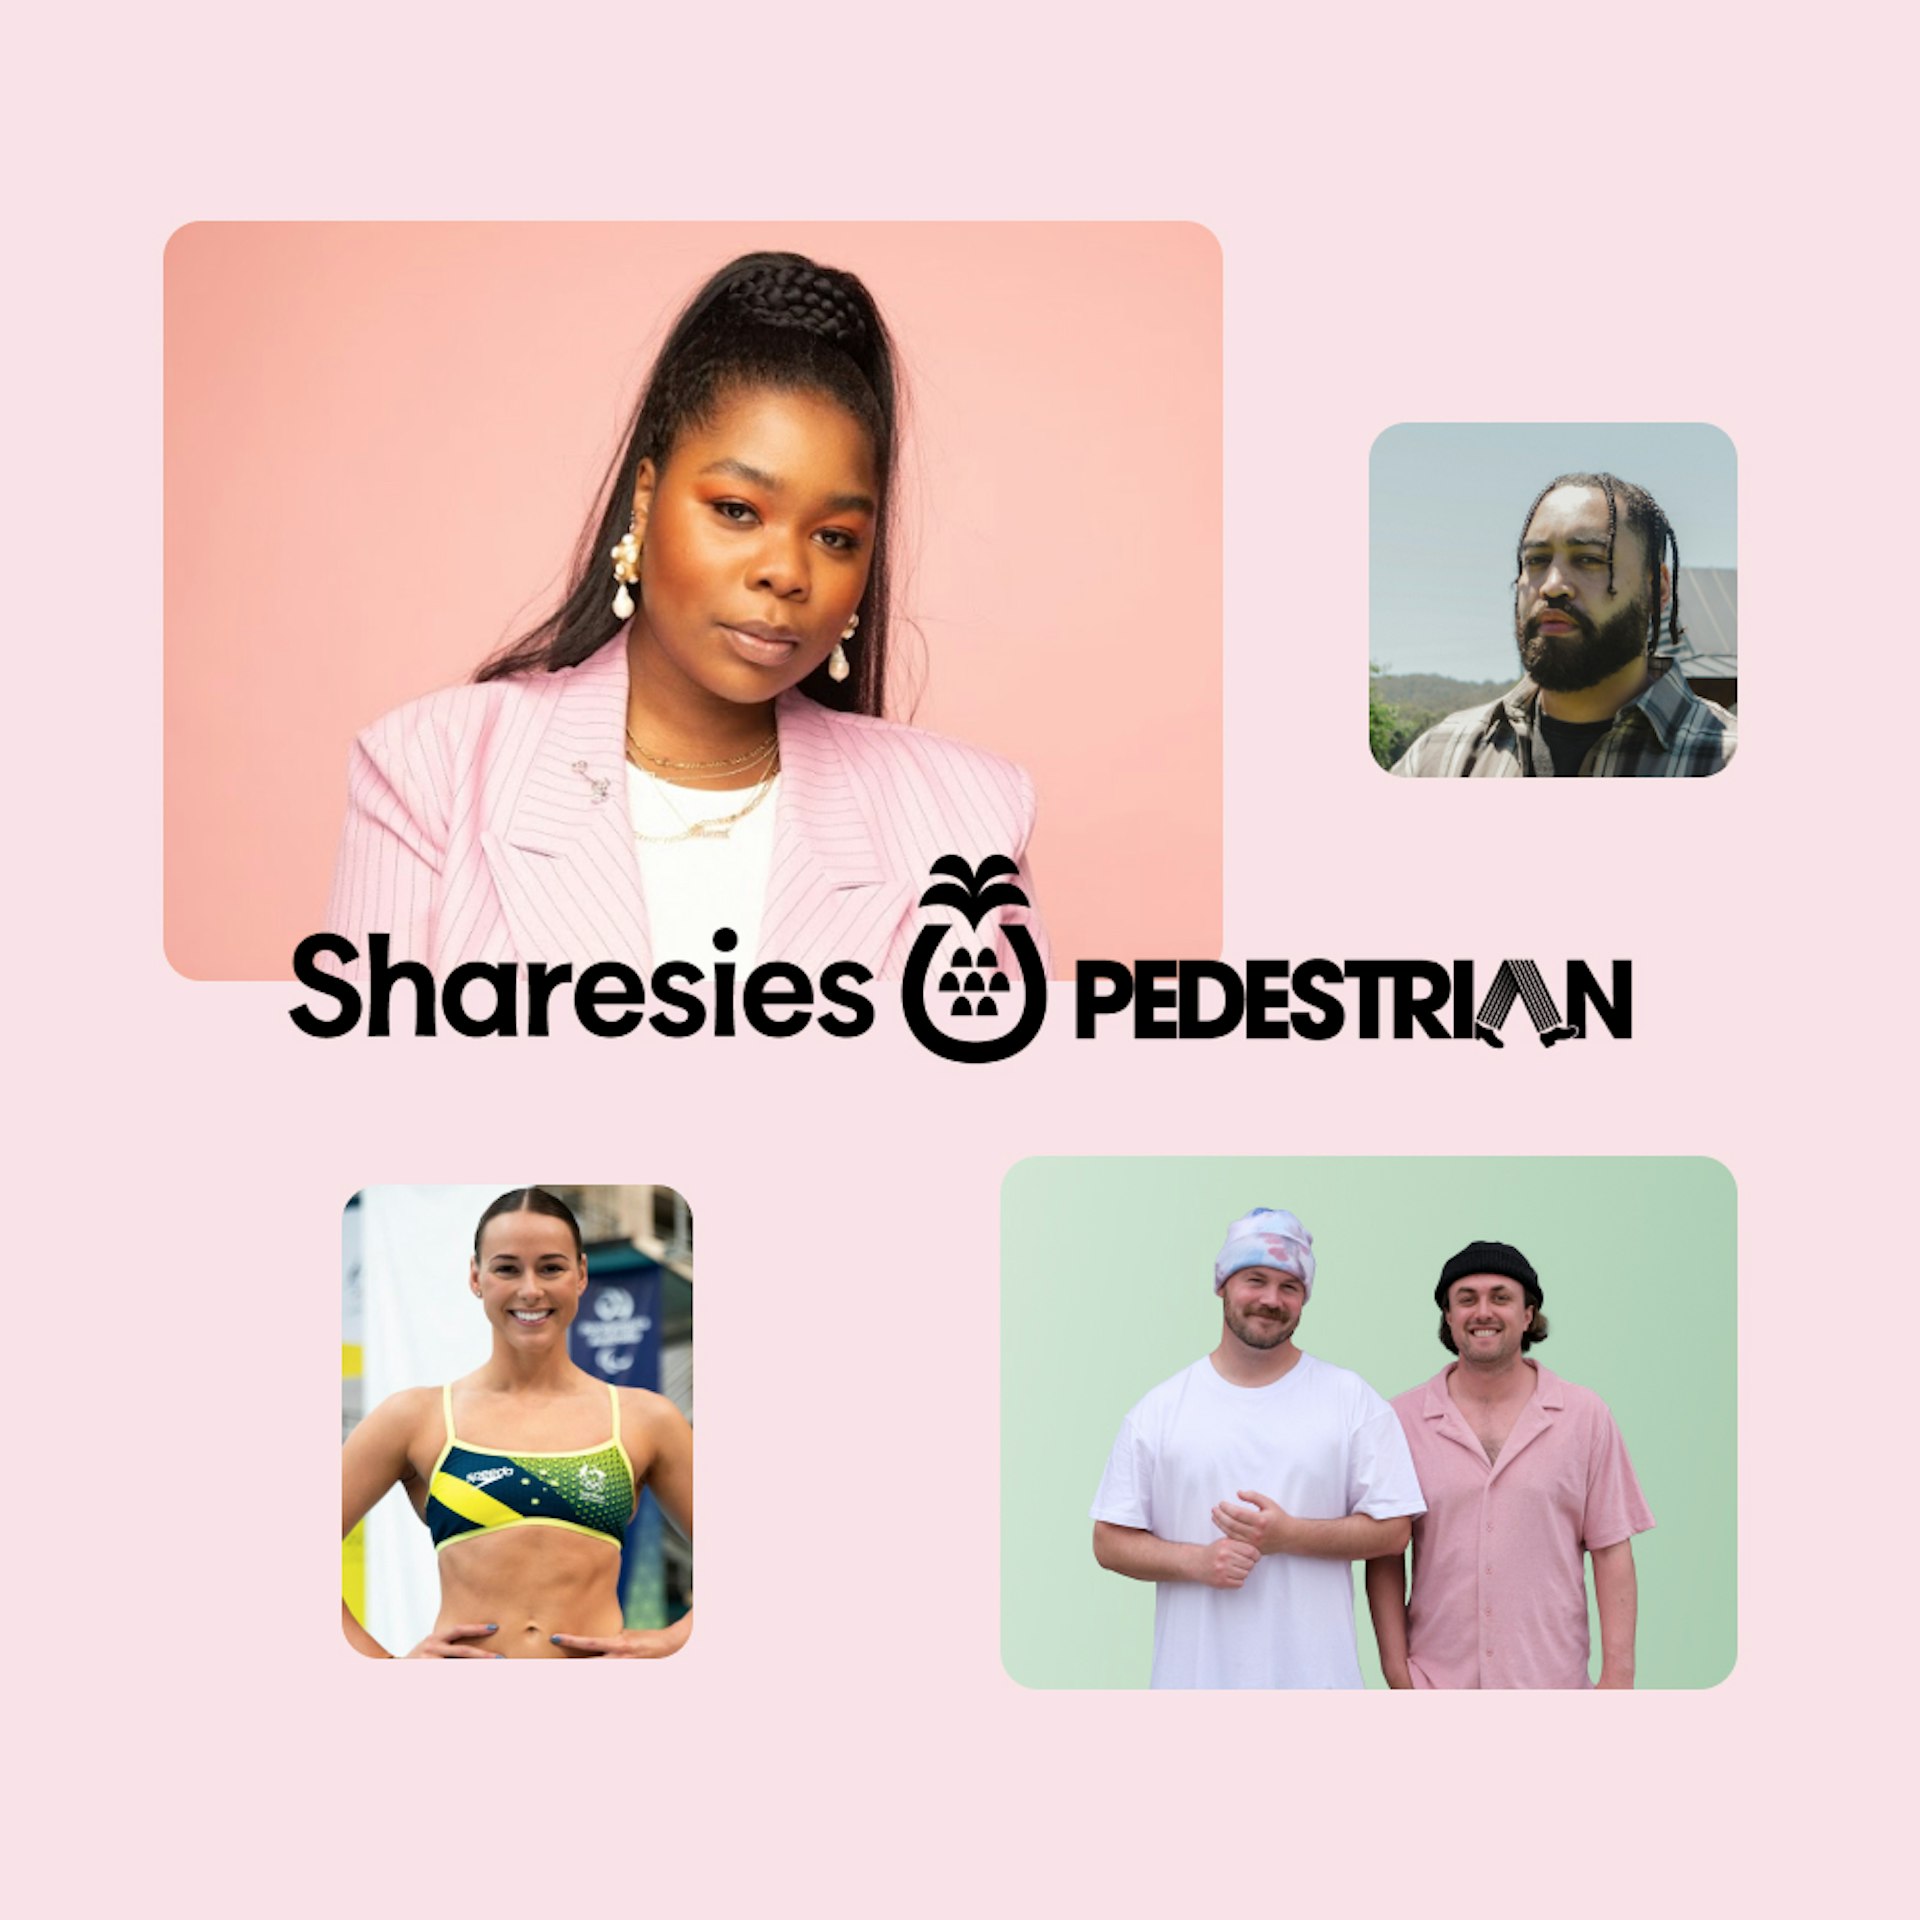 Sharesies teamed up with Pedestrian Group for our biggest partnership yet.